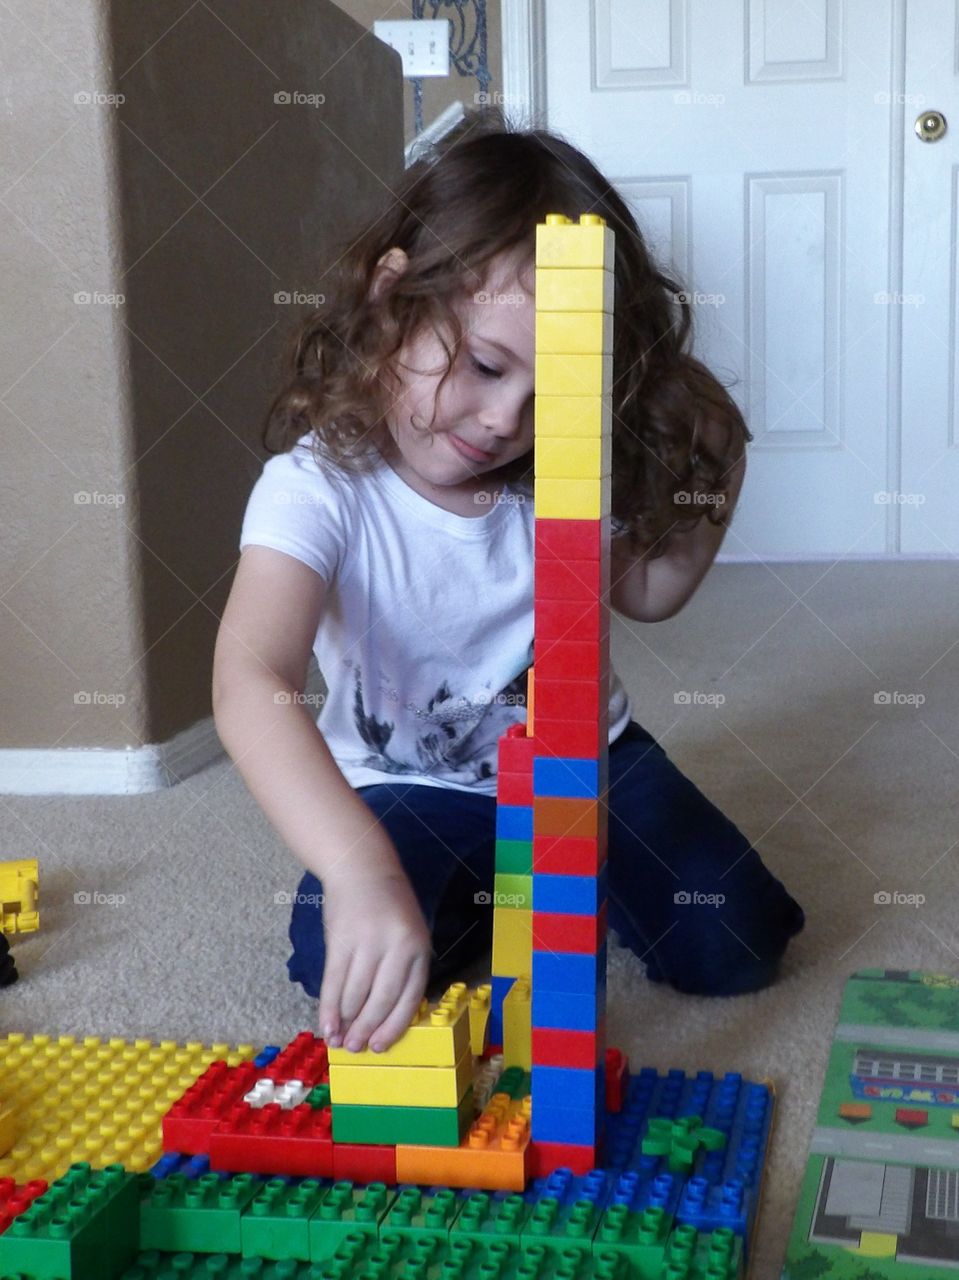 Building a tower